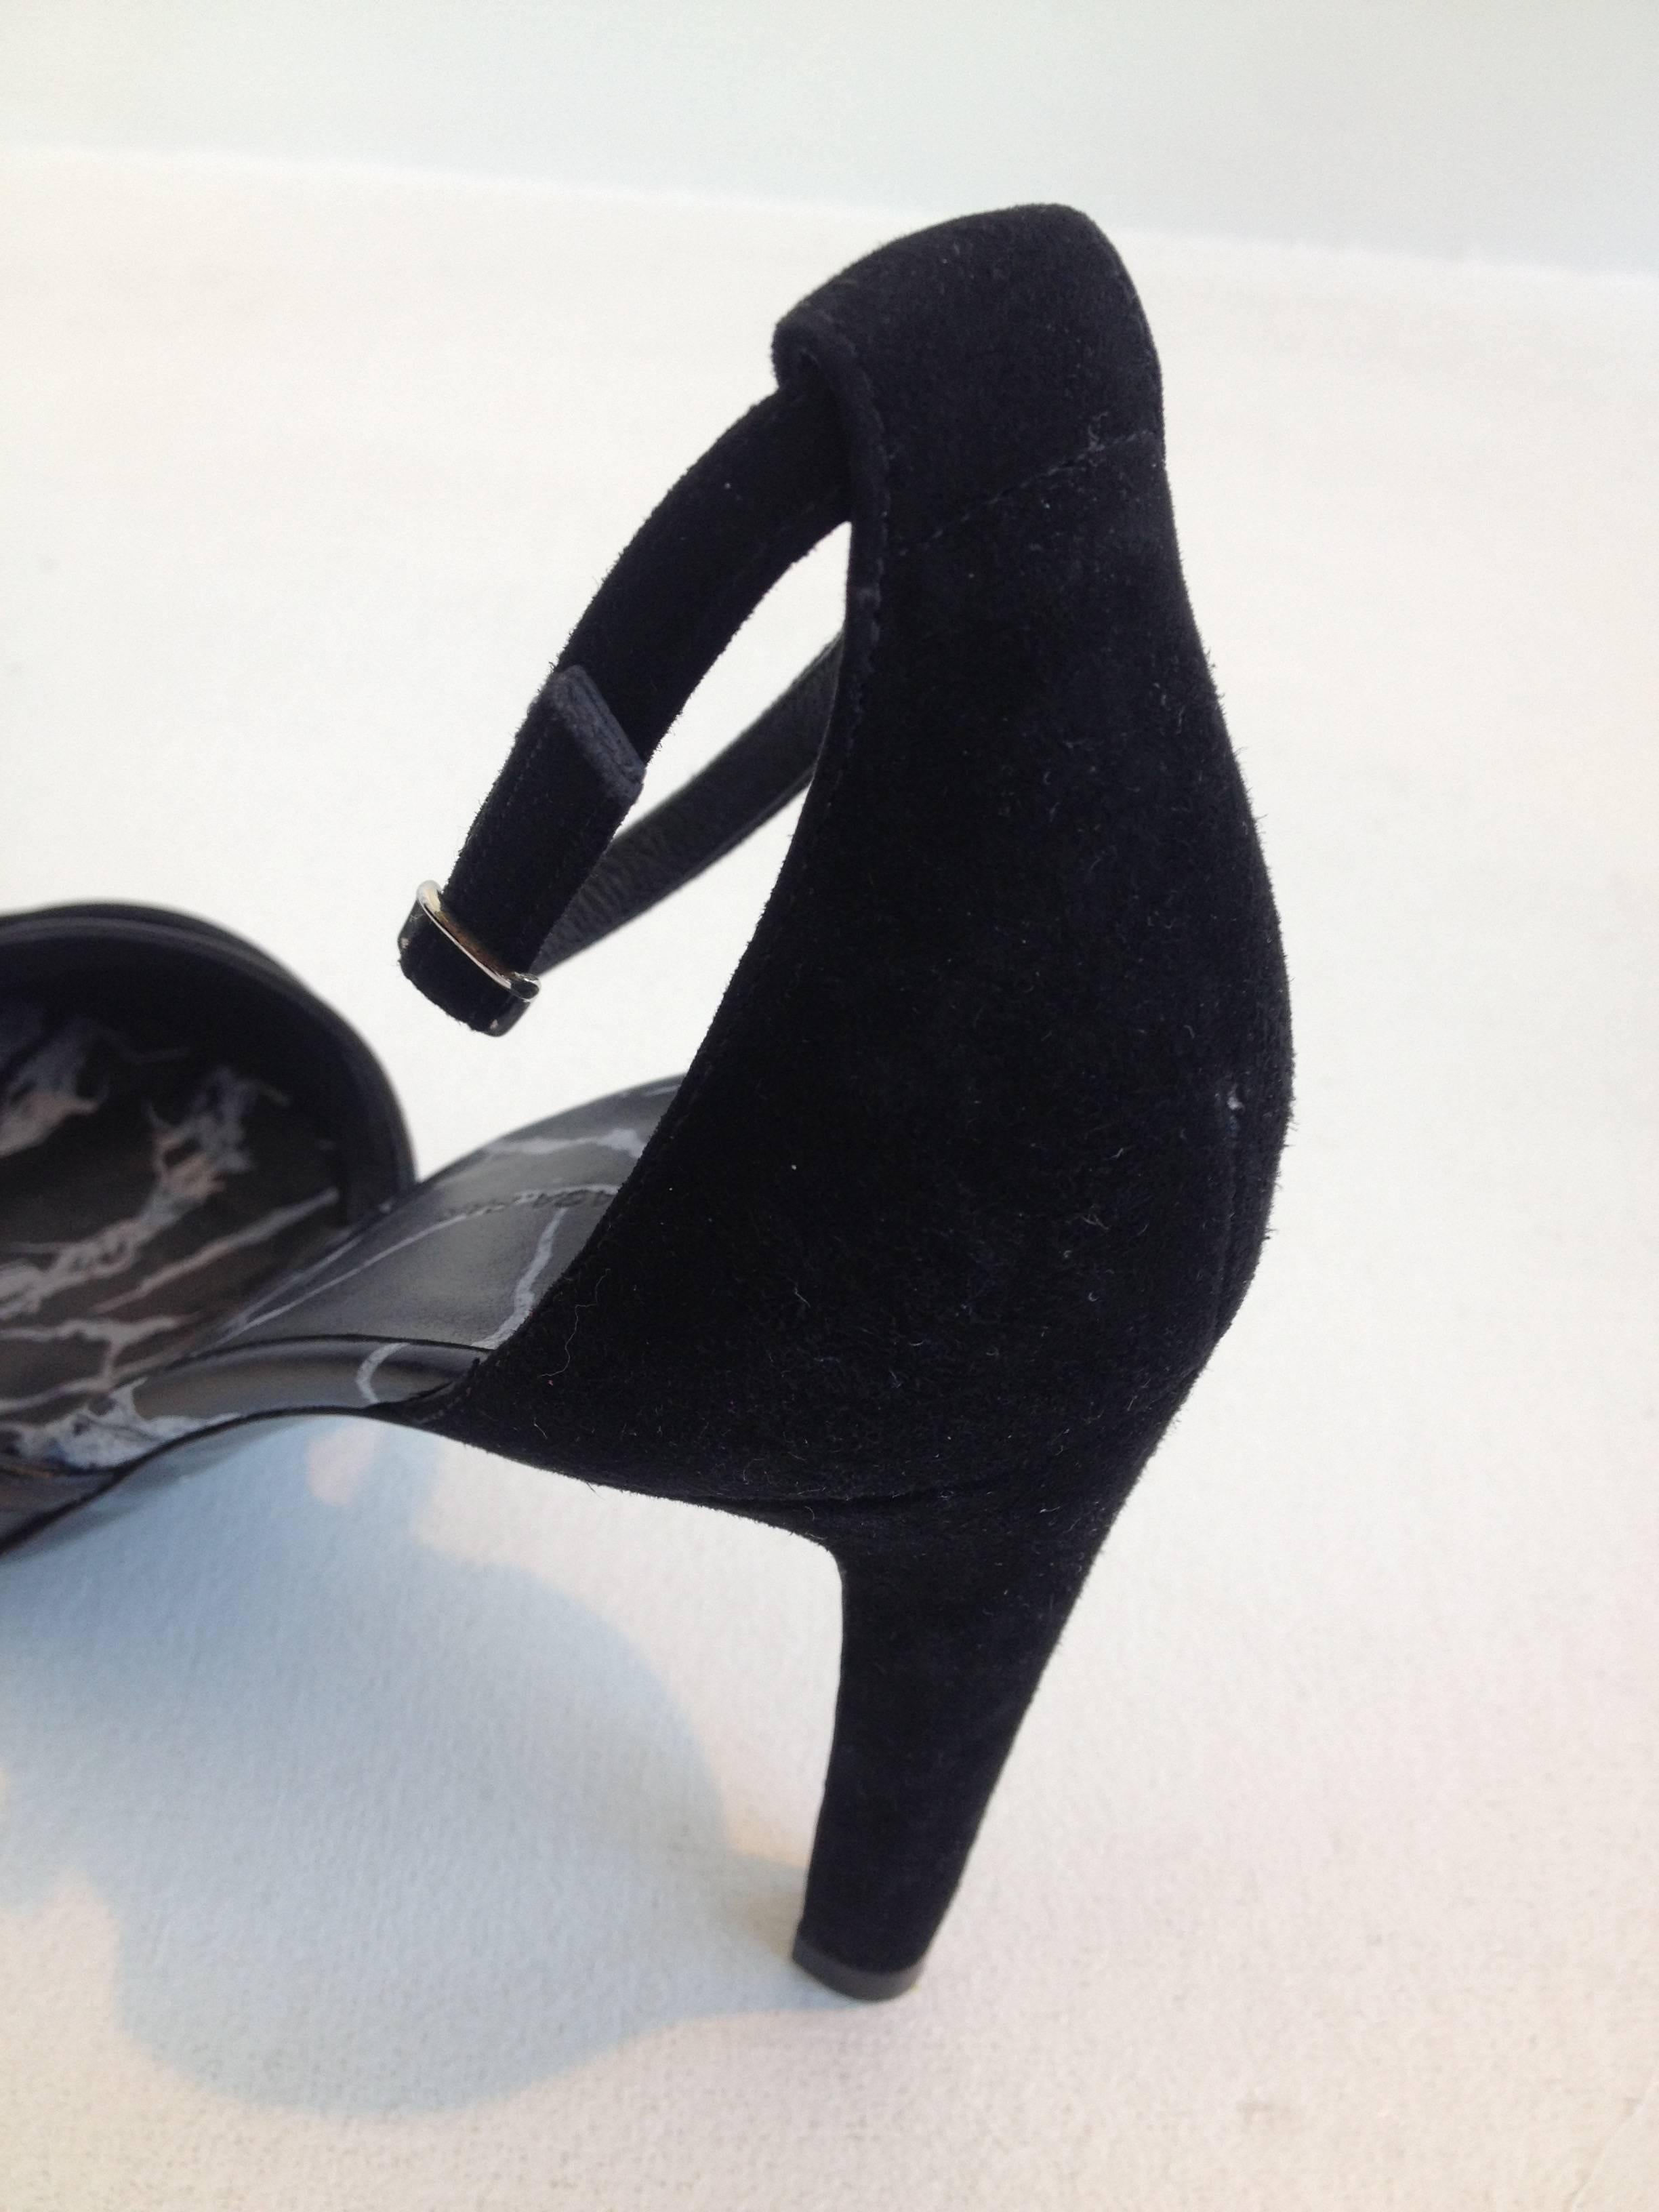 Balenciaga Black Suede and Leather Ankle Strap Heels Size 38 (7.5) For Sale 1